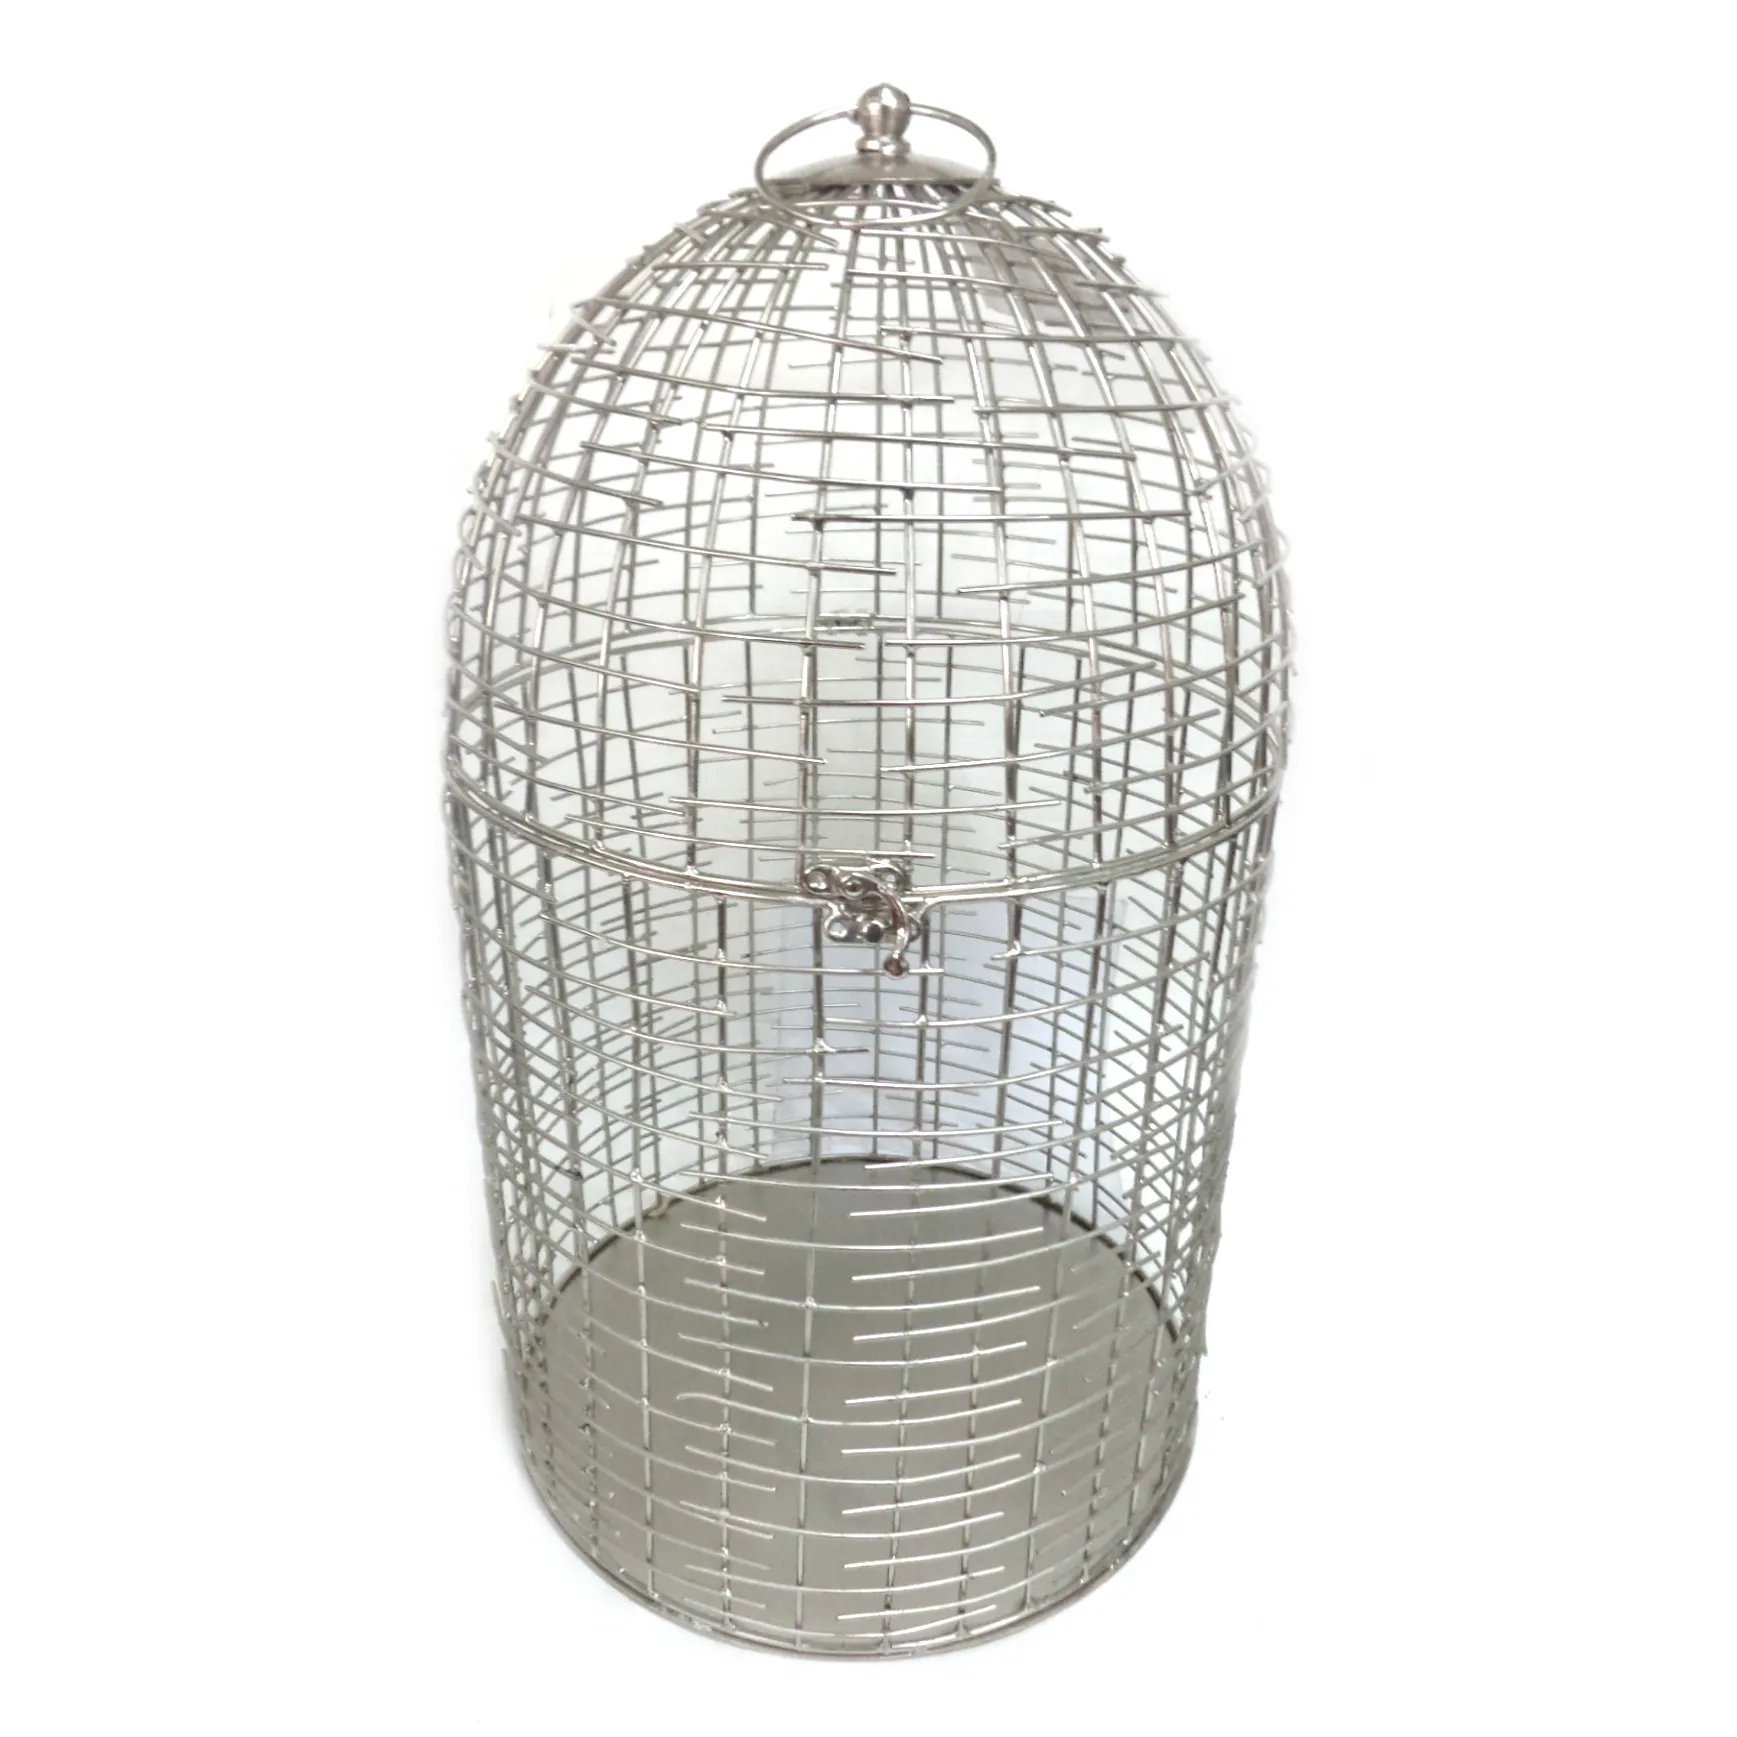 New Arrival Latest Style Bird Cage Nickel Silver Color Classic Design Pet Cage For Garden & Home Decoration Customized